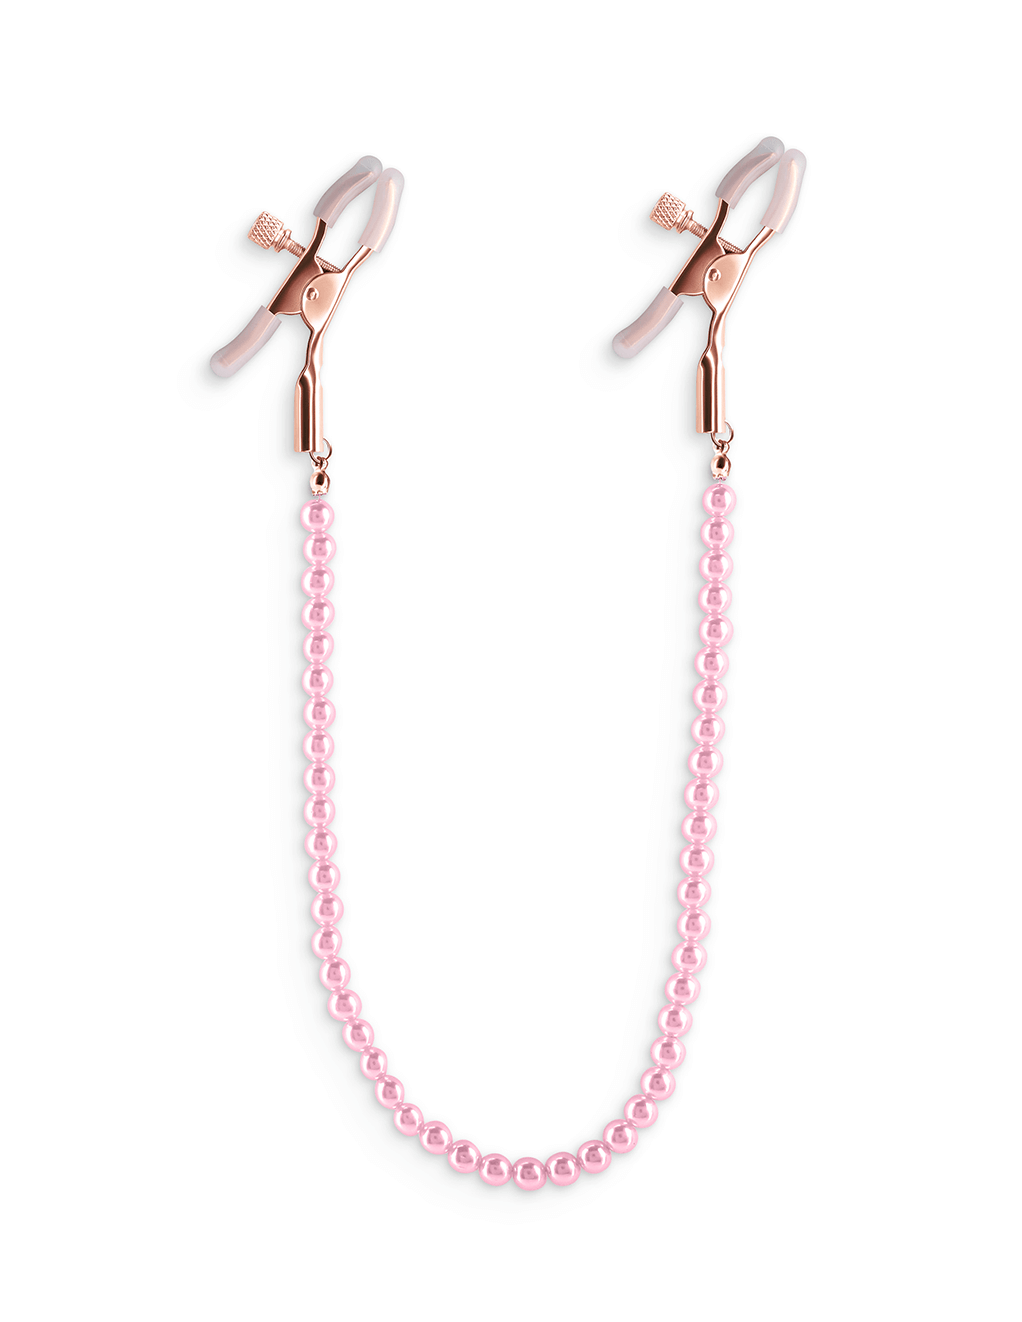 Adjustable Pearl Chain Clamps DC1 - Pink